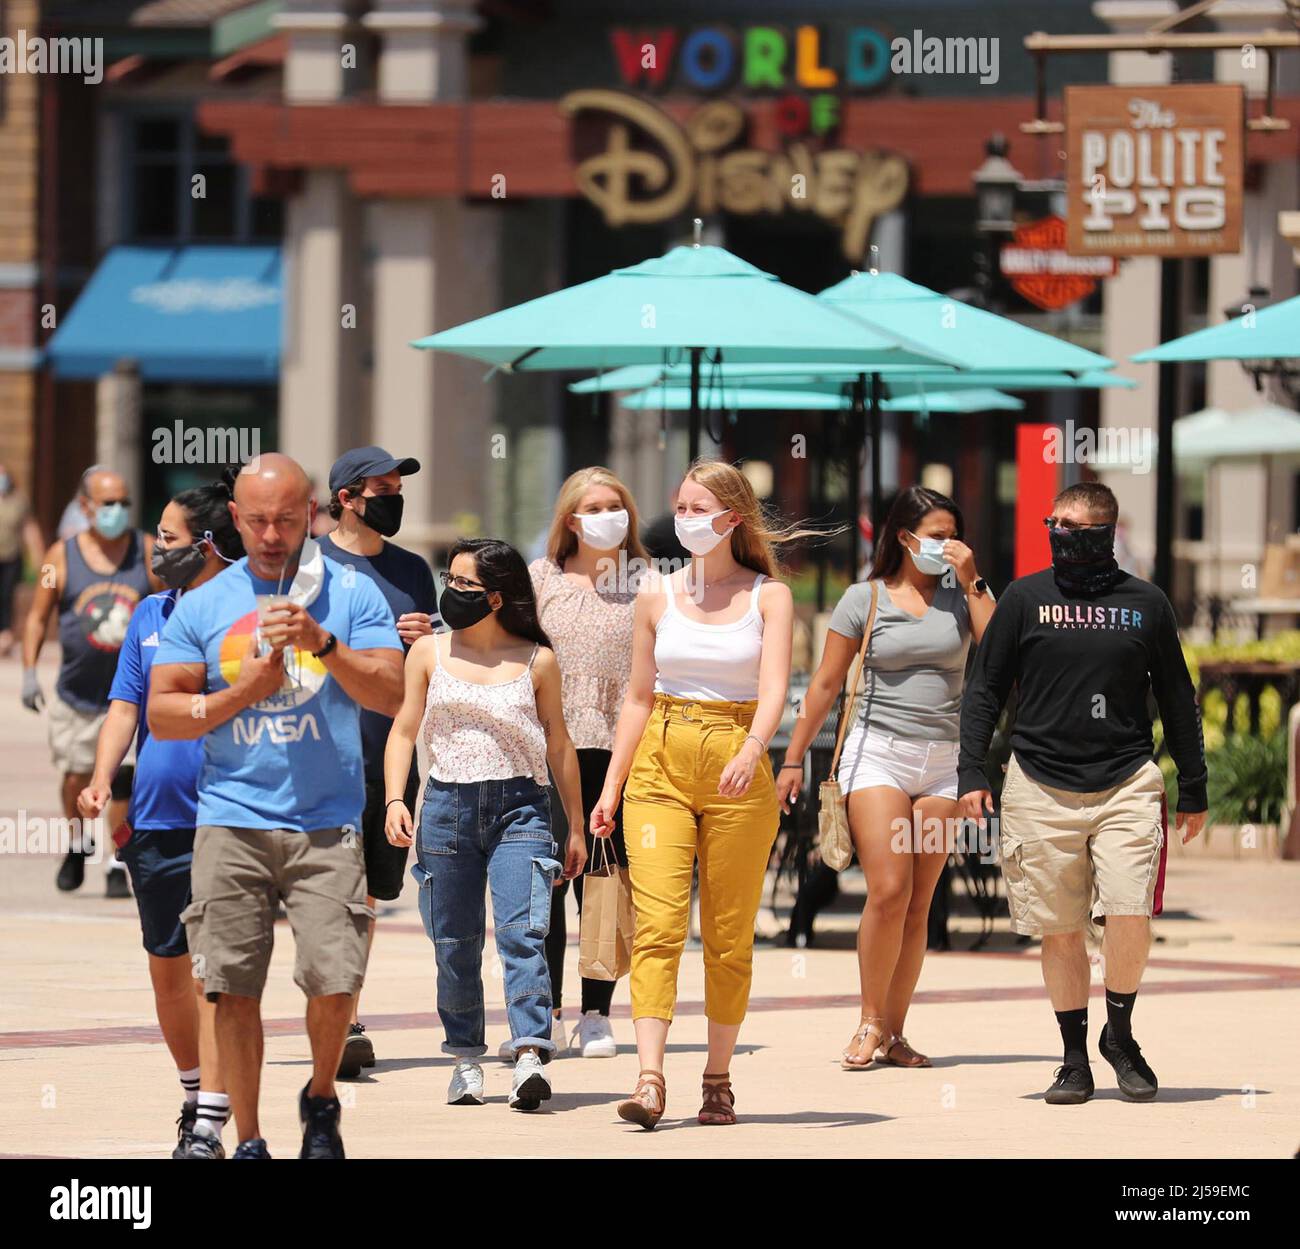 Orlando, USA. 20th May, 2020. Guests stroll at Disney Springs in Orlando on Wednesday, May 20, 2020. Walt Disney World's sprawling shopping and dining complex is beginning the first phase of getting back to business, with 44 establishments welcoming the public during the coronavirus pandemic. (Photo by Stephen M. Dowell/Orlando Sentinel/TNS/Sipa USA) Credit: Sipa USA/Alamy Live News Stock Photo